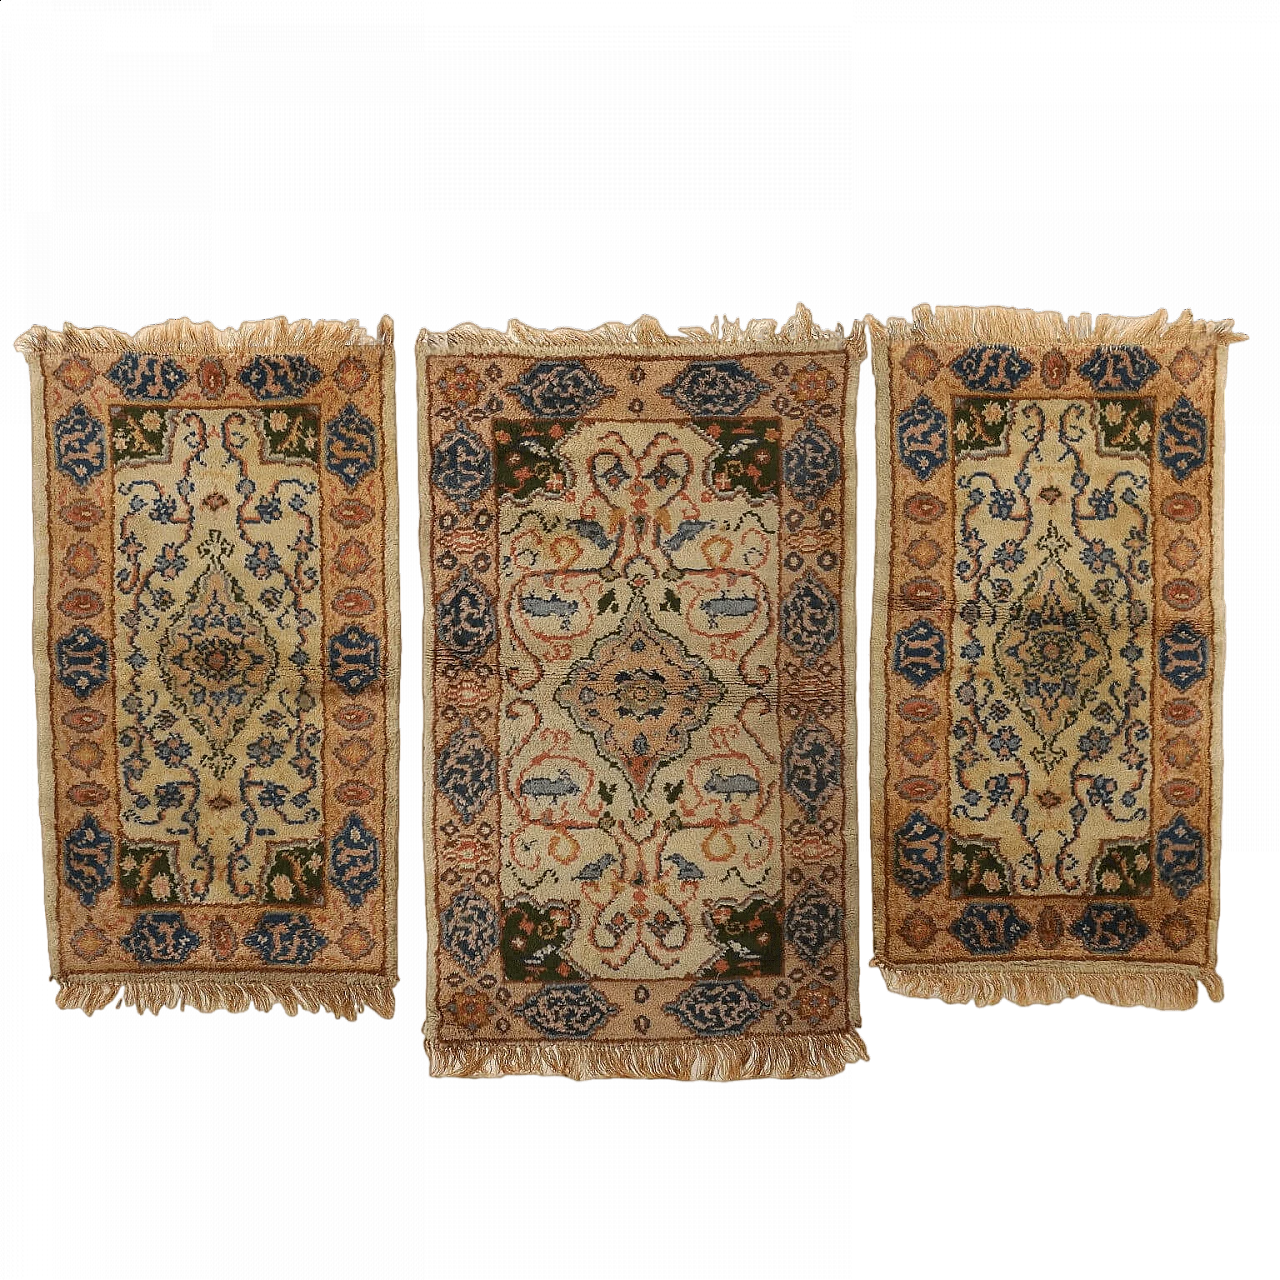 3 Moroccan cotton and wool Marrakech rugs 11